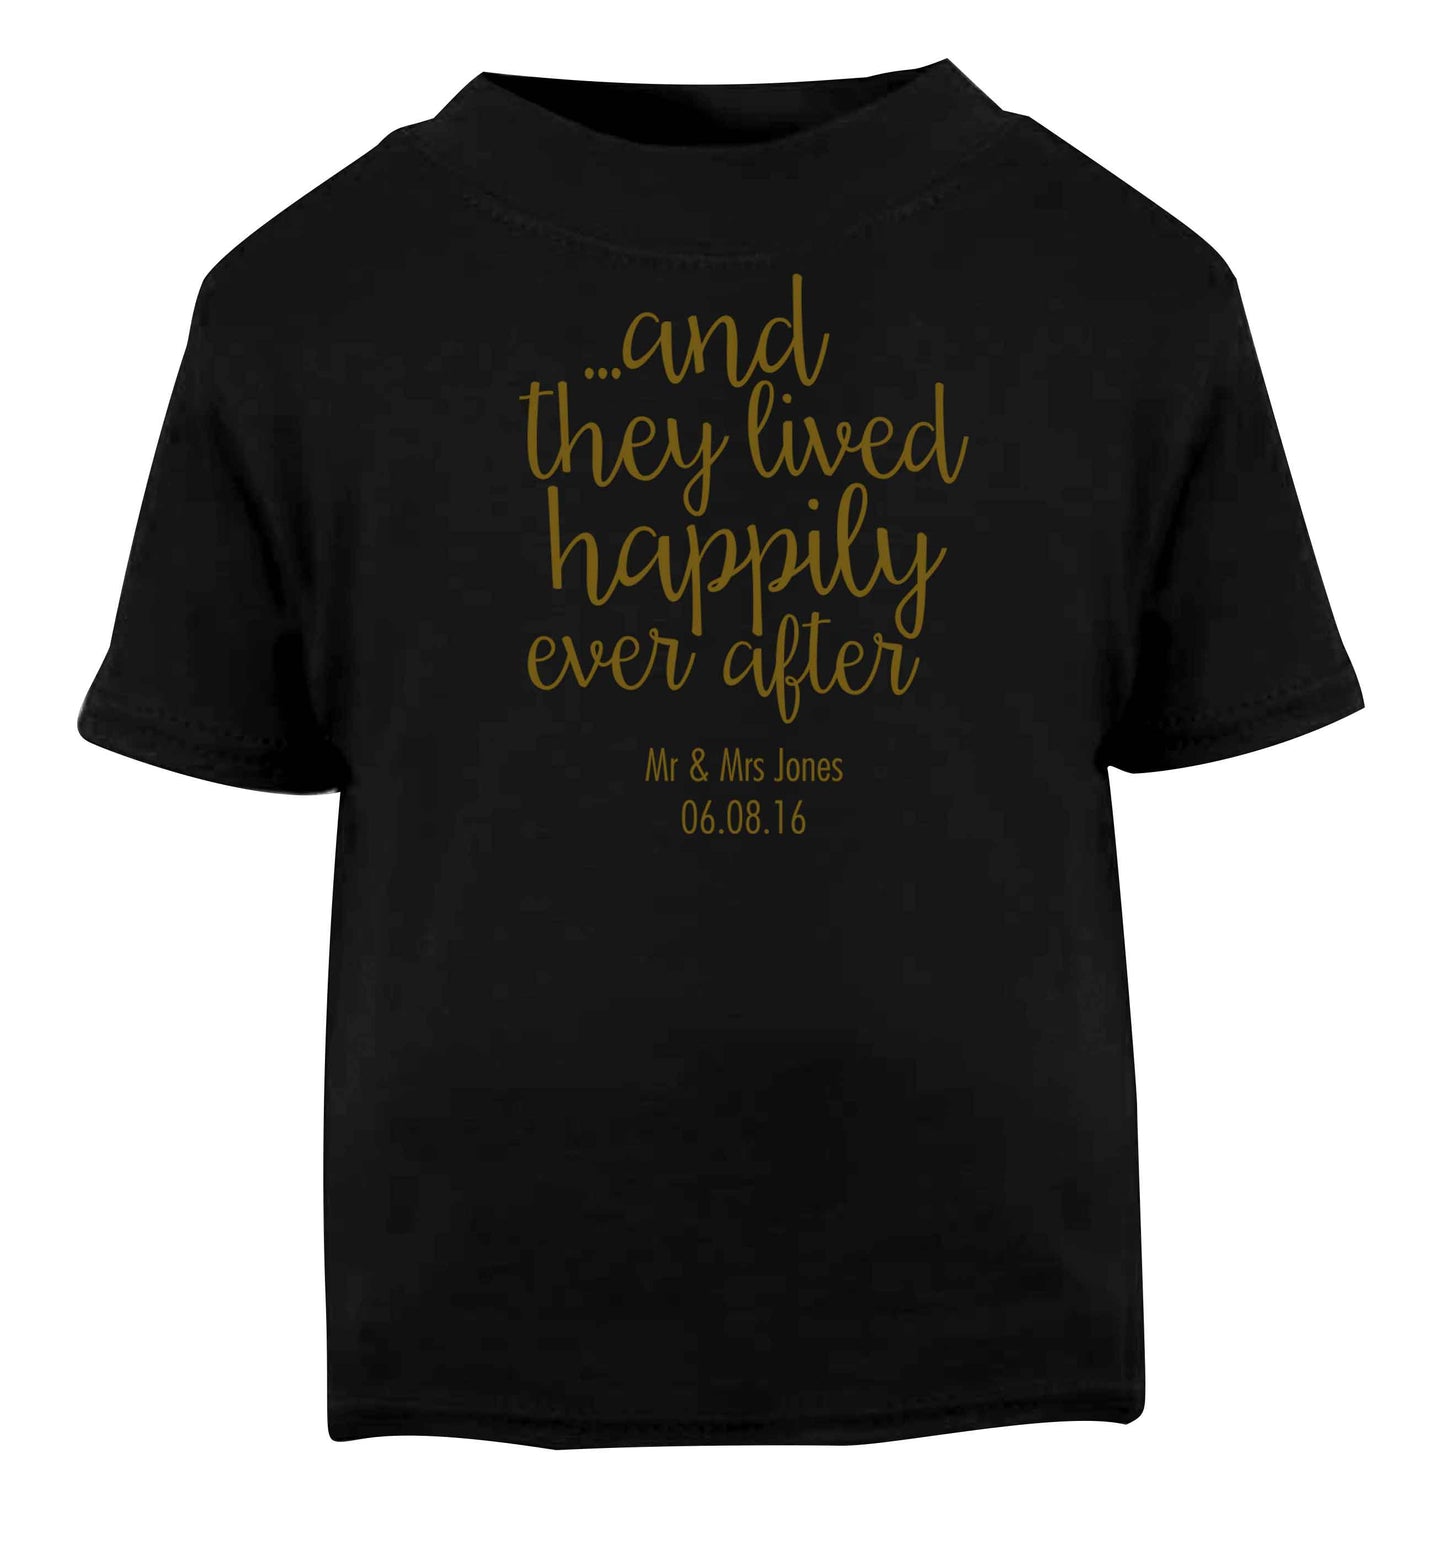 ...and they lived happily ever after - personalised date and names Black baby toddler Tshirt 2 years